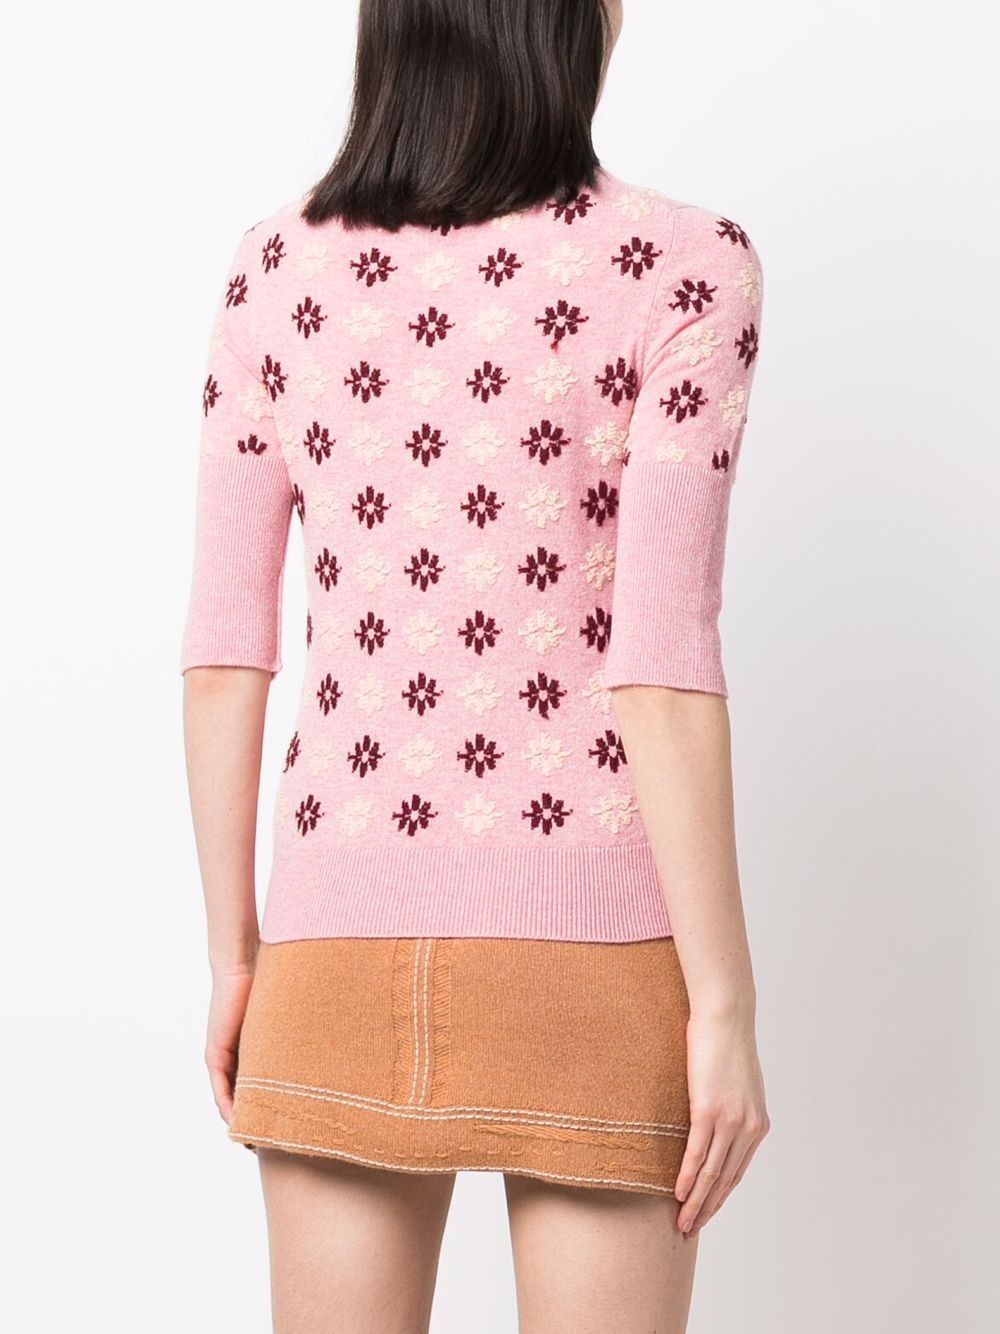 Shop Barrie floral-print intarsia-knit cashmere top with Express ...